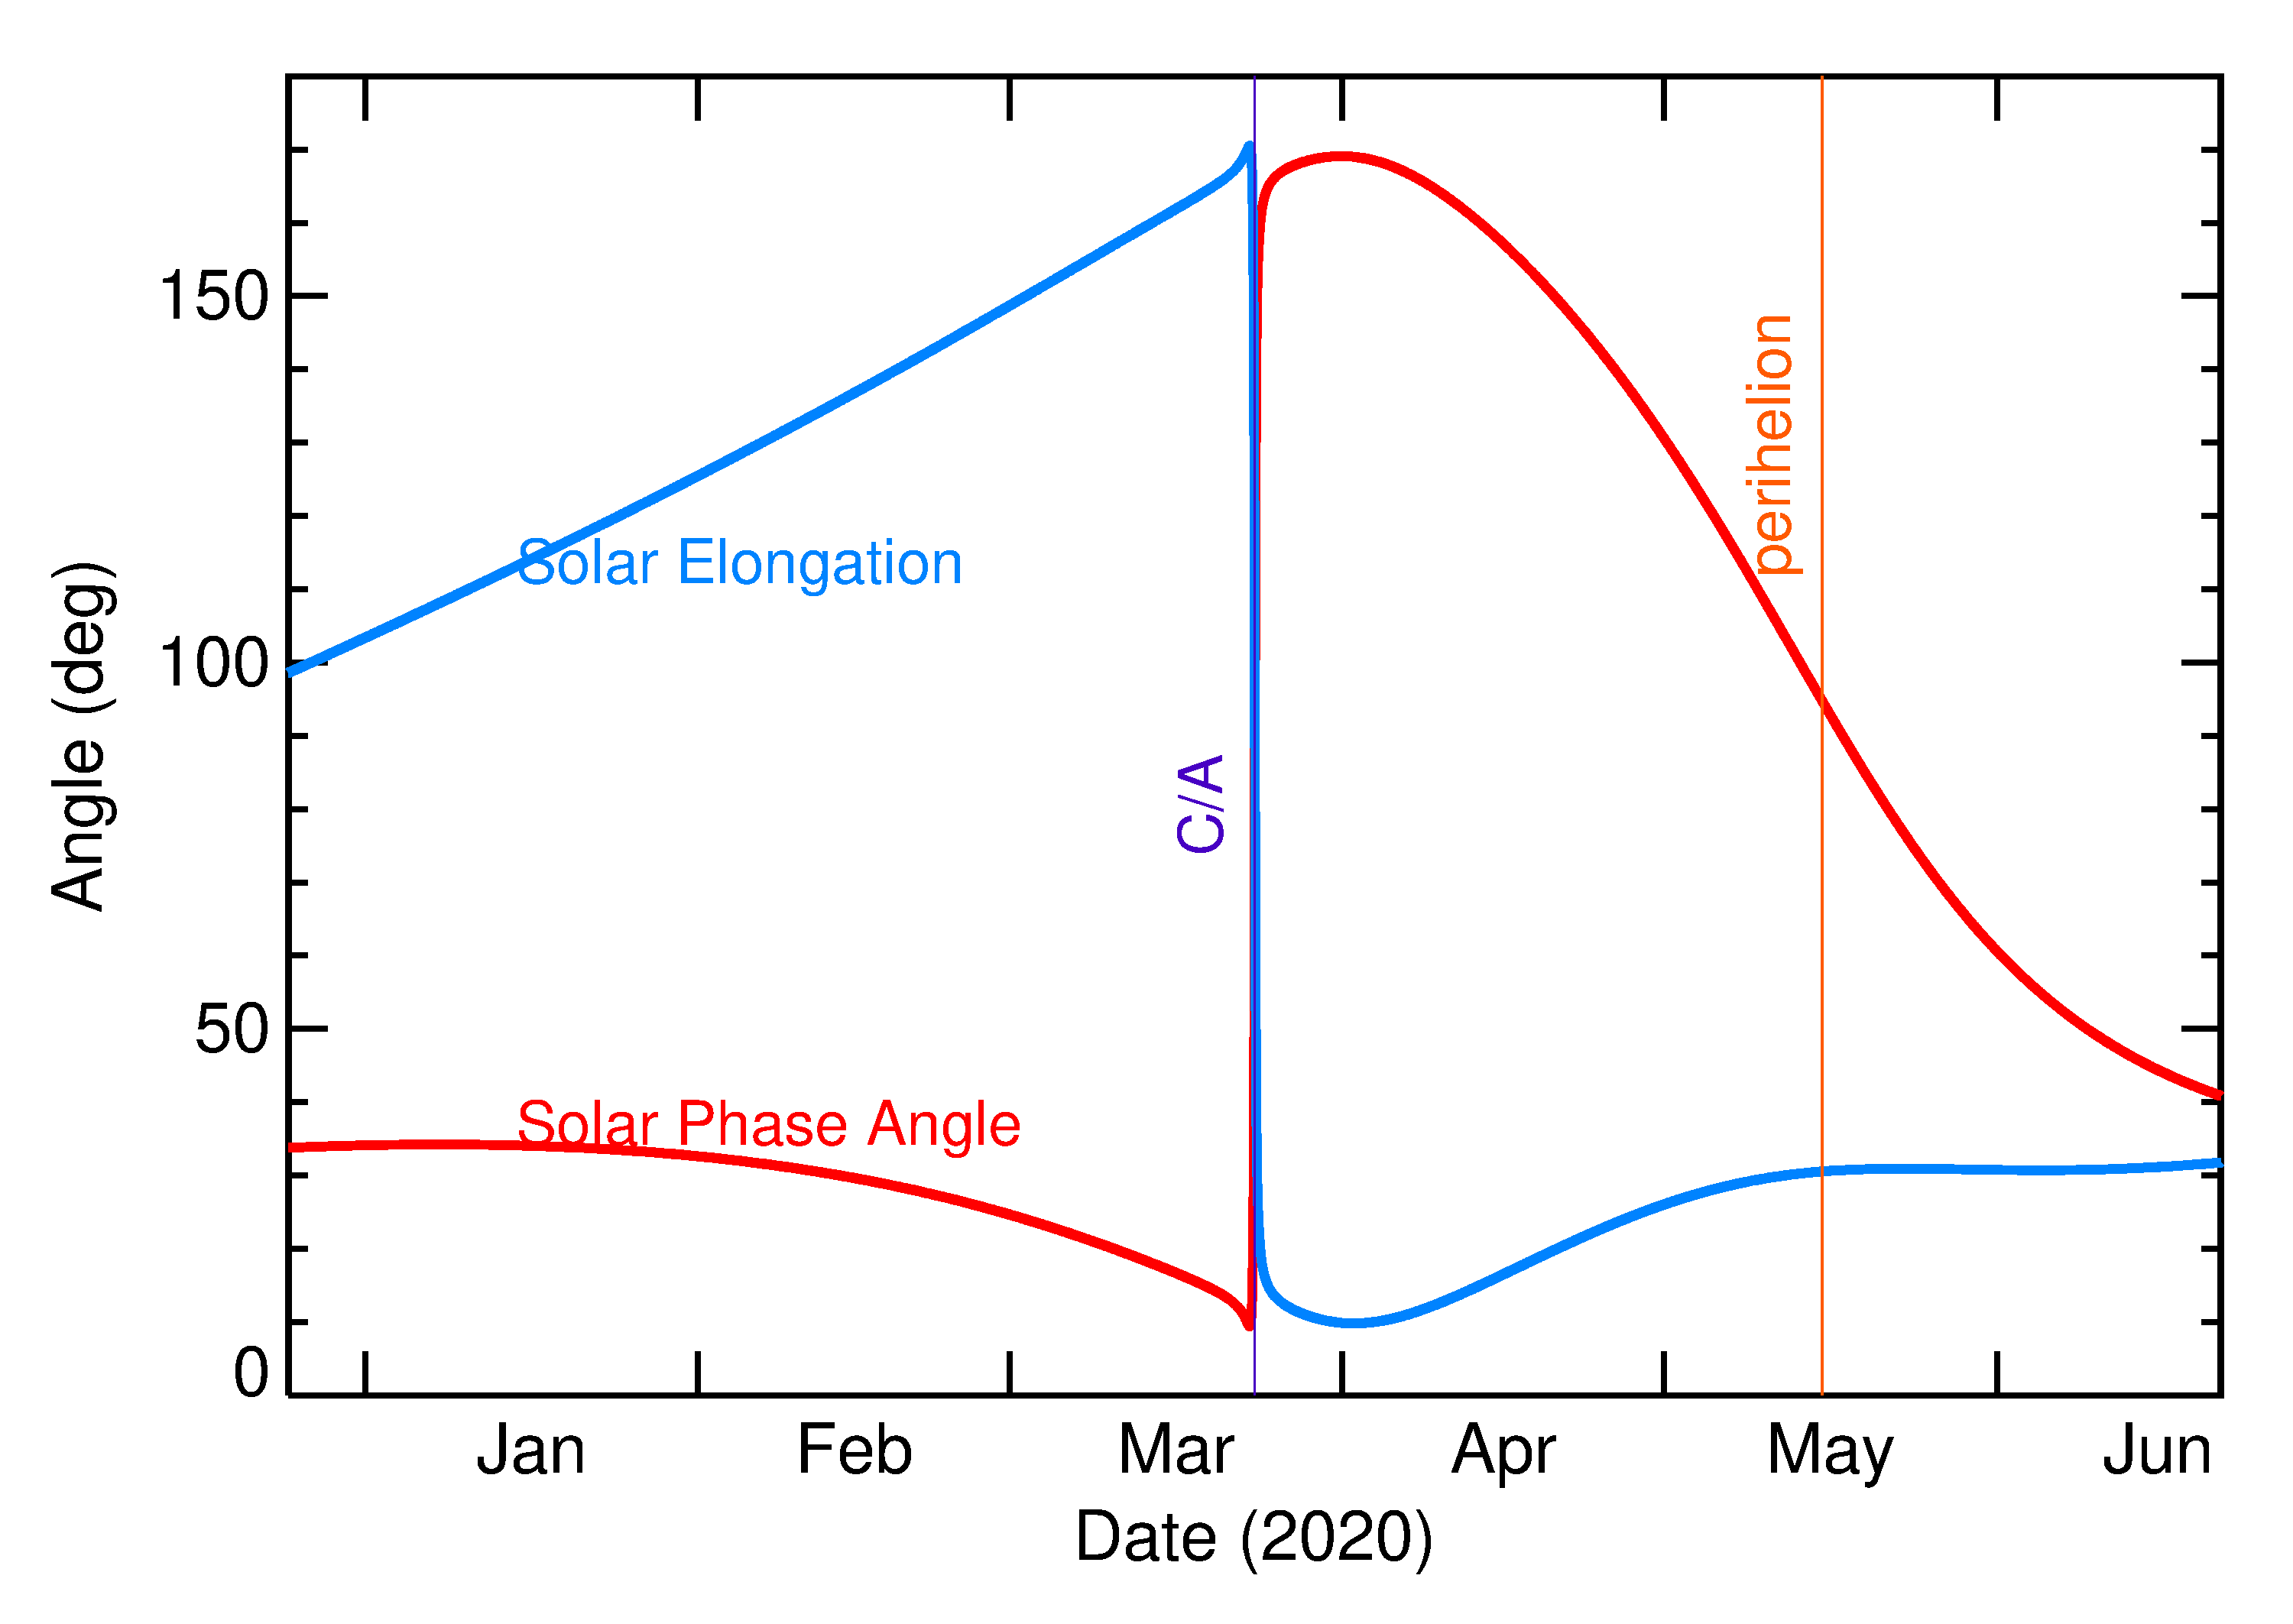 Solar Elongation and Solar Phase Angle of 2020 FL2 in the months around closest approach